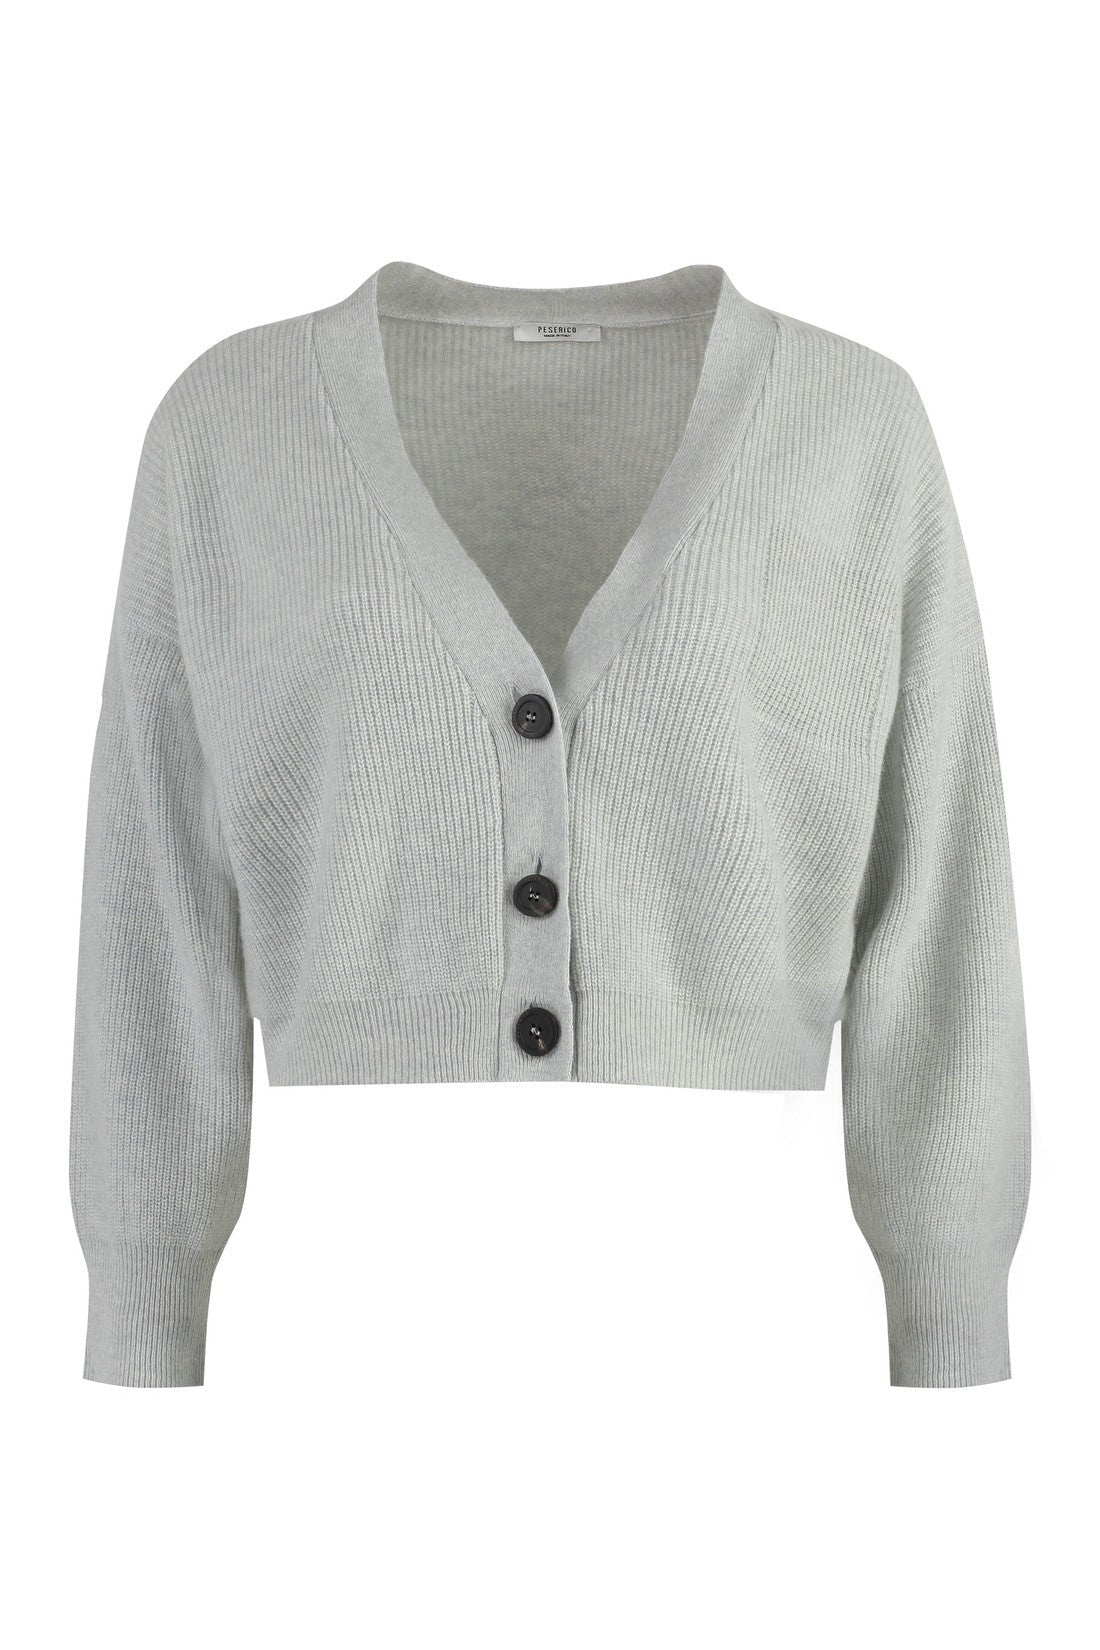 Peserico-OUTLET-SALE-wool-blend cardigan-ARCHIVIST